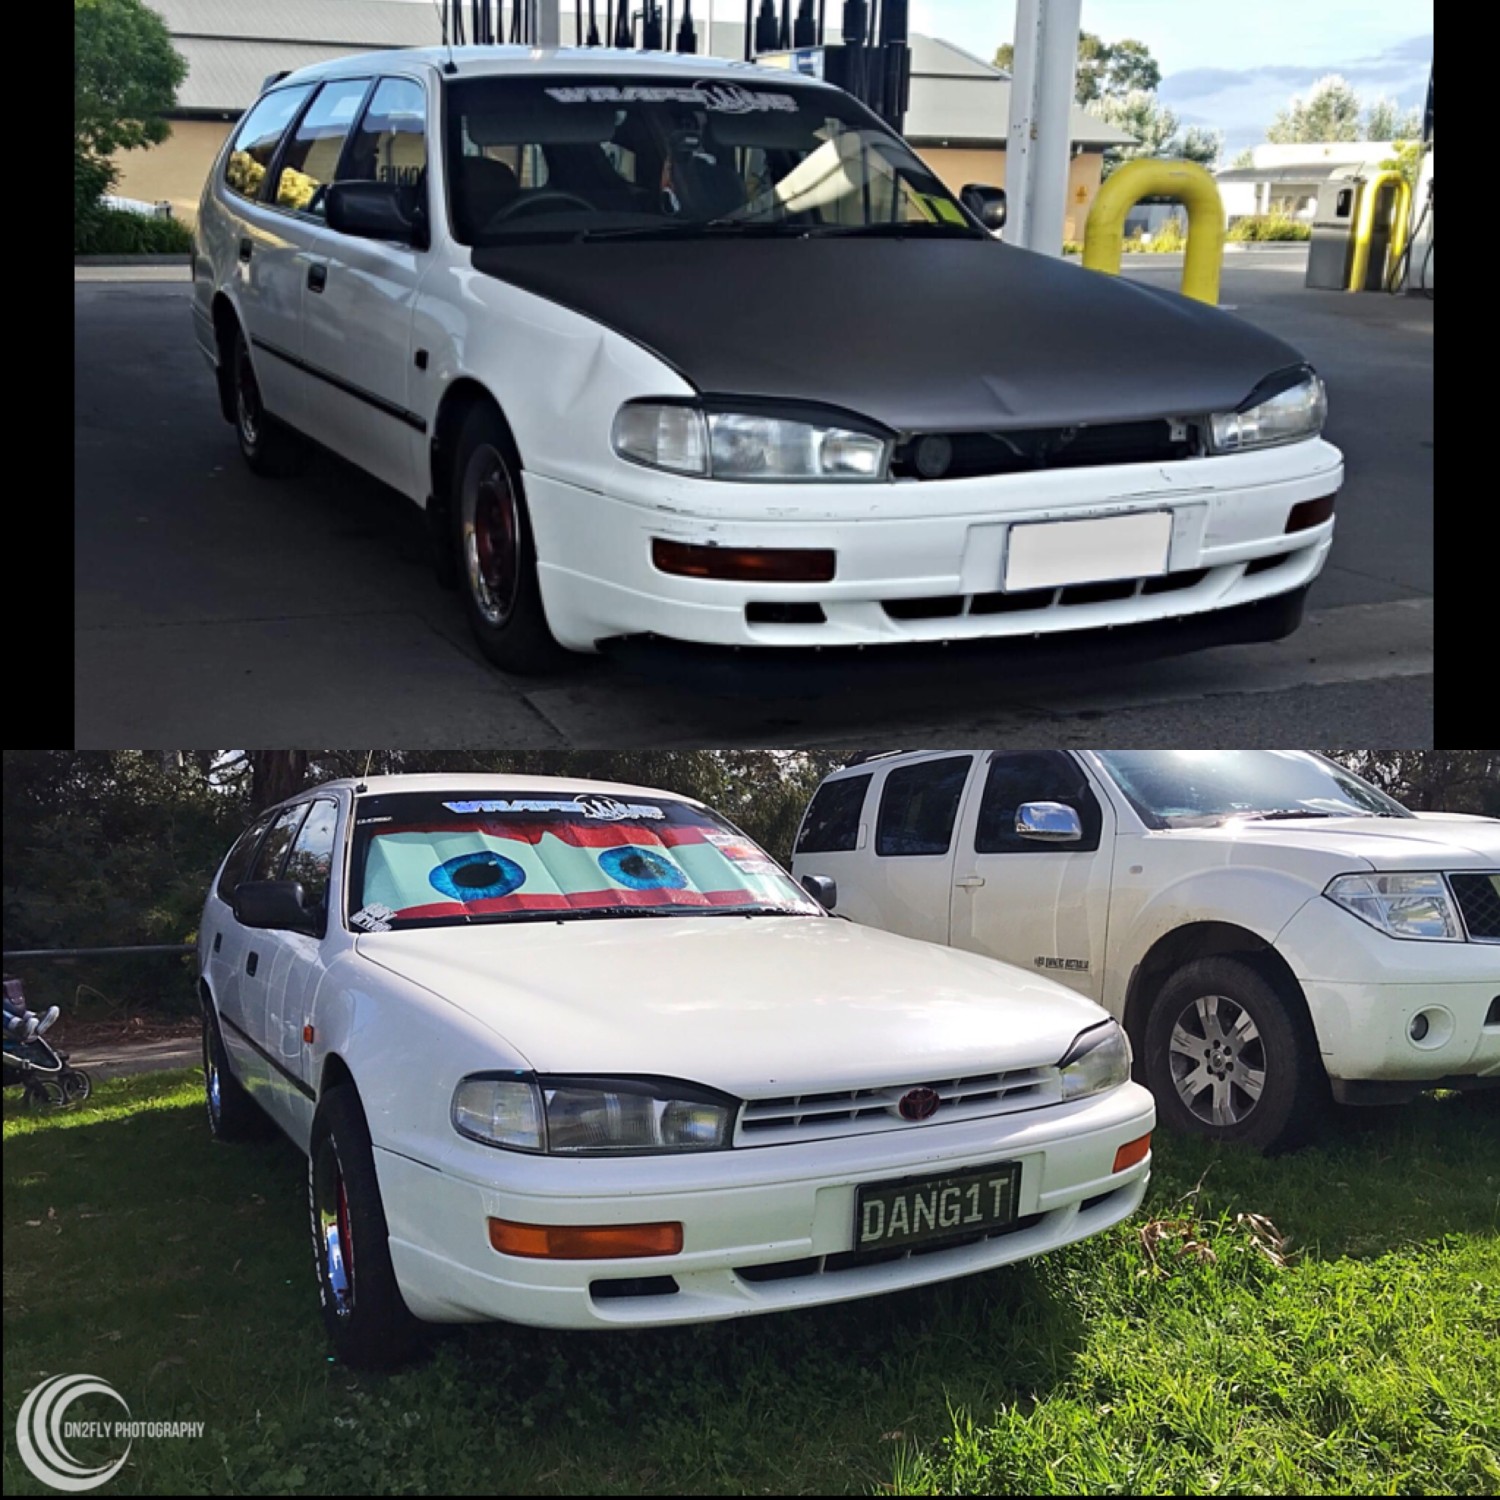 camry toyota 1995 club shannons